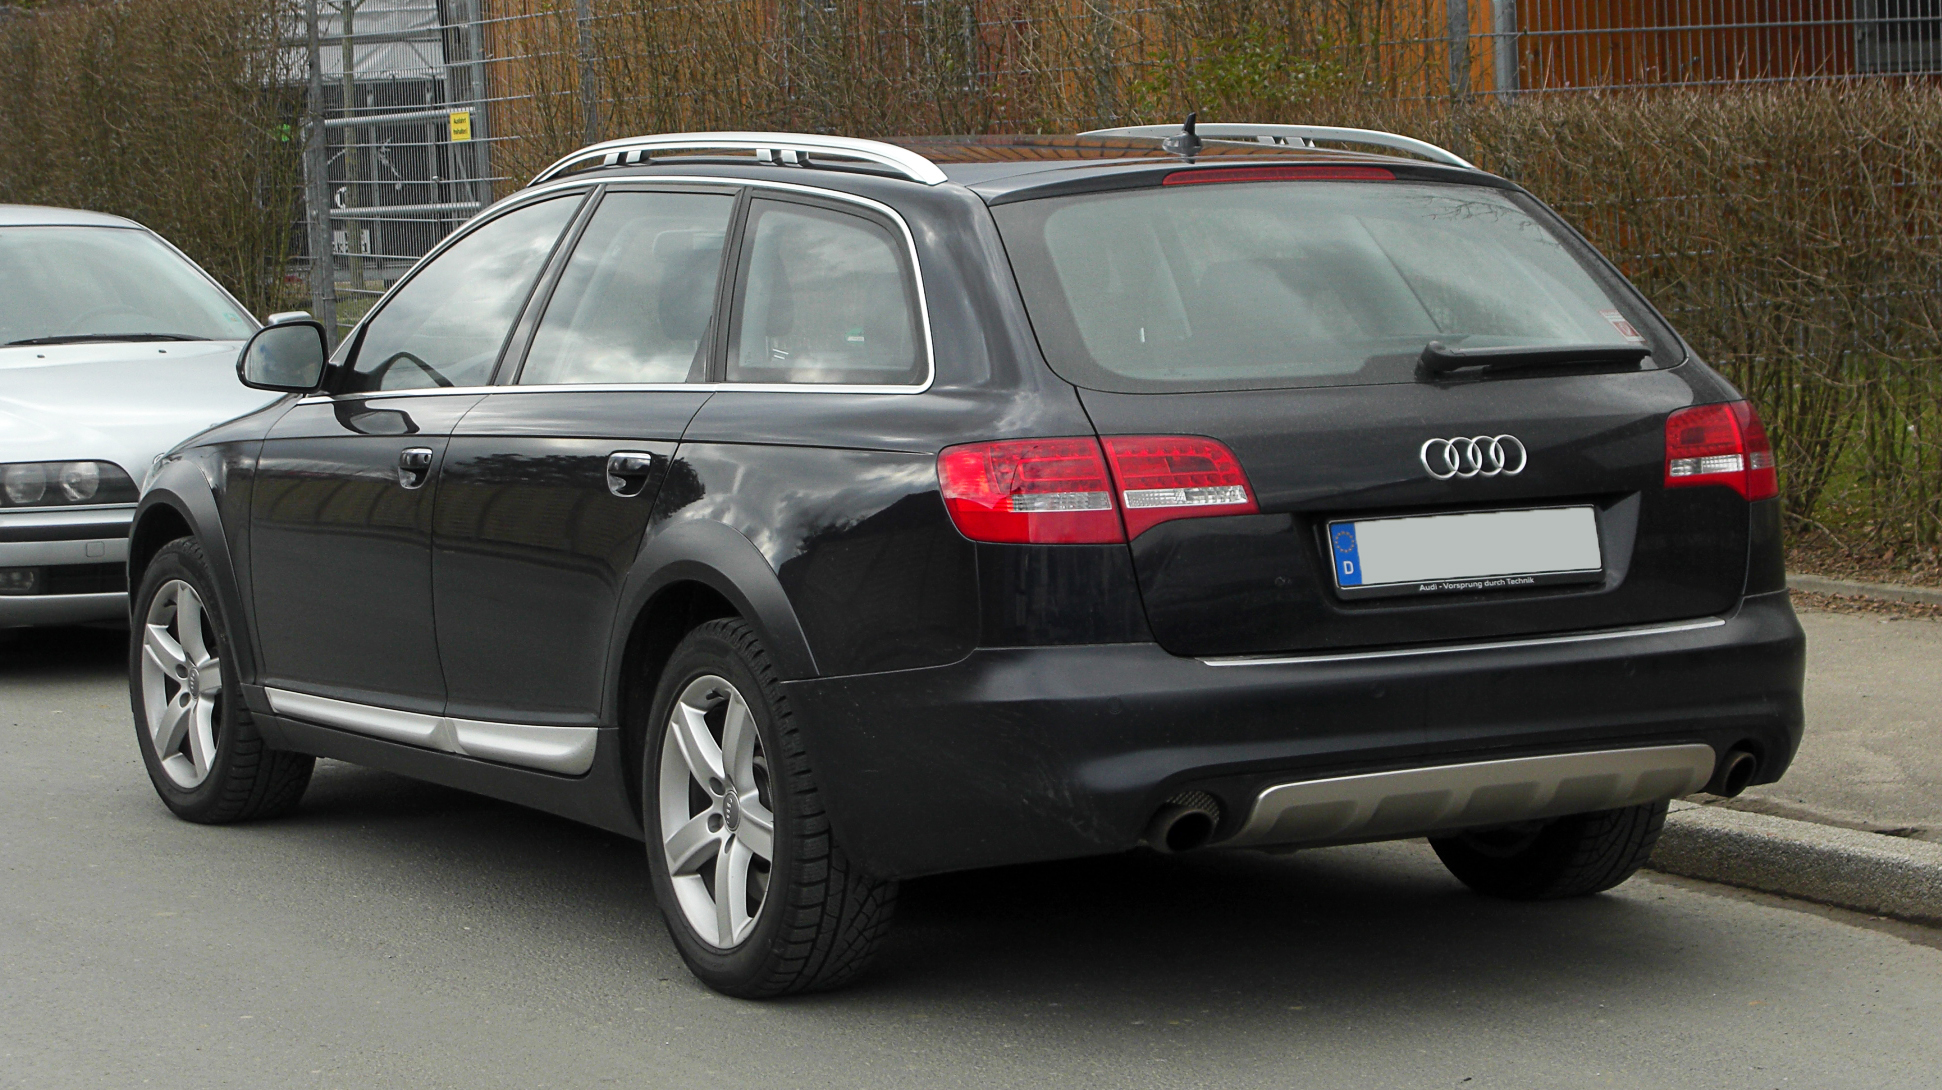 Audi - A6 (C6) II 2006 Station CARS :: door OUTSTANDING allroad 5 2011 wagon